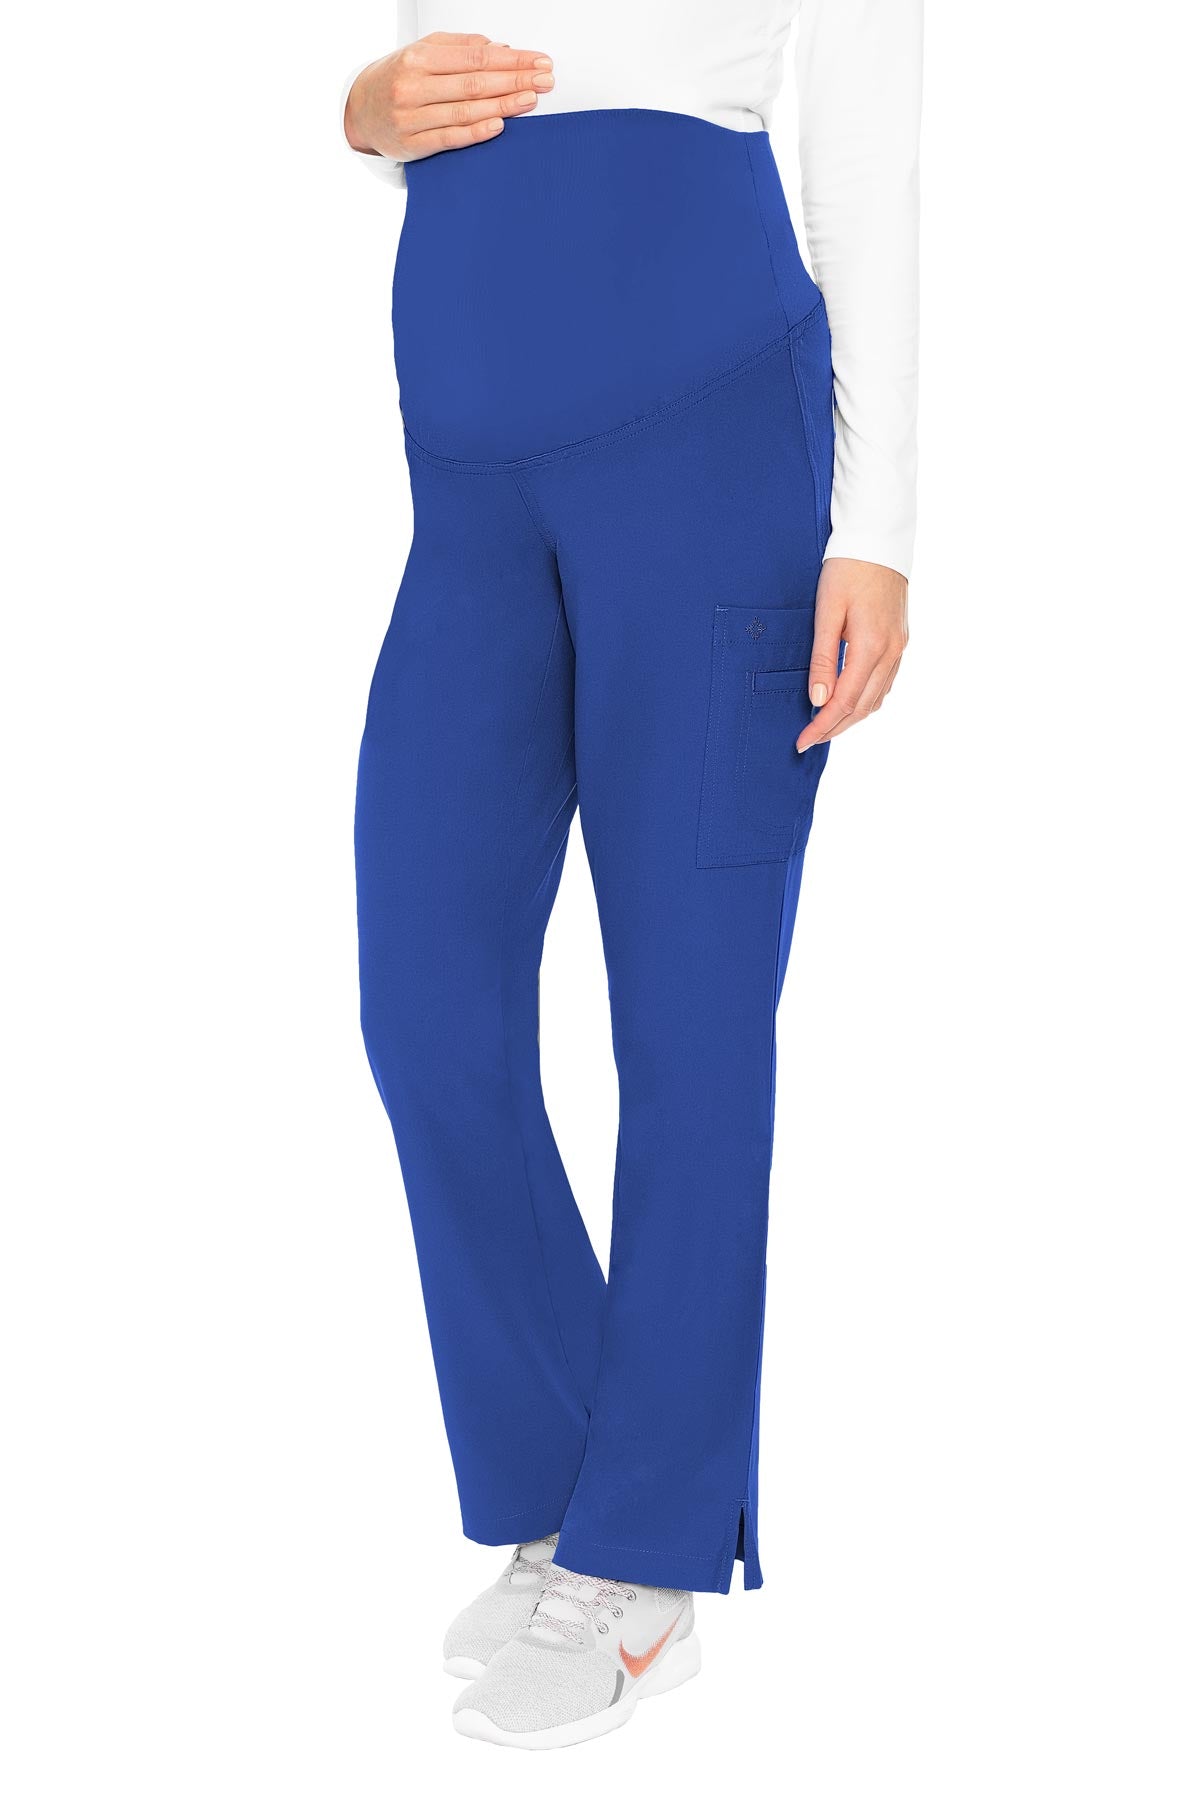 Med Couture Royal PANT